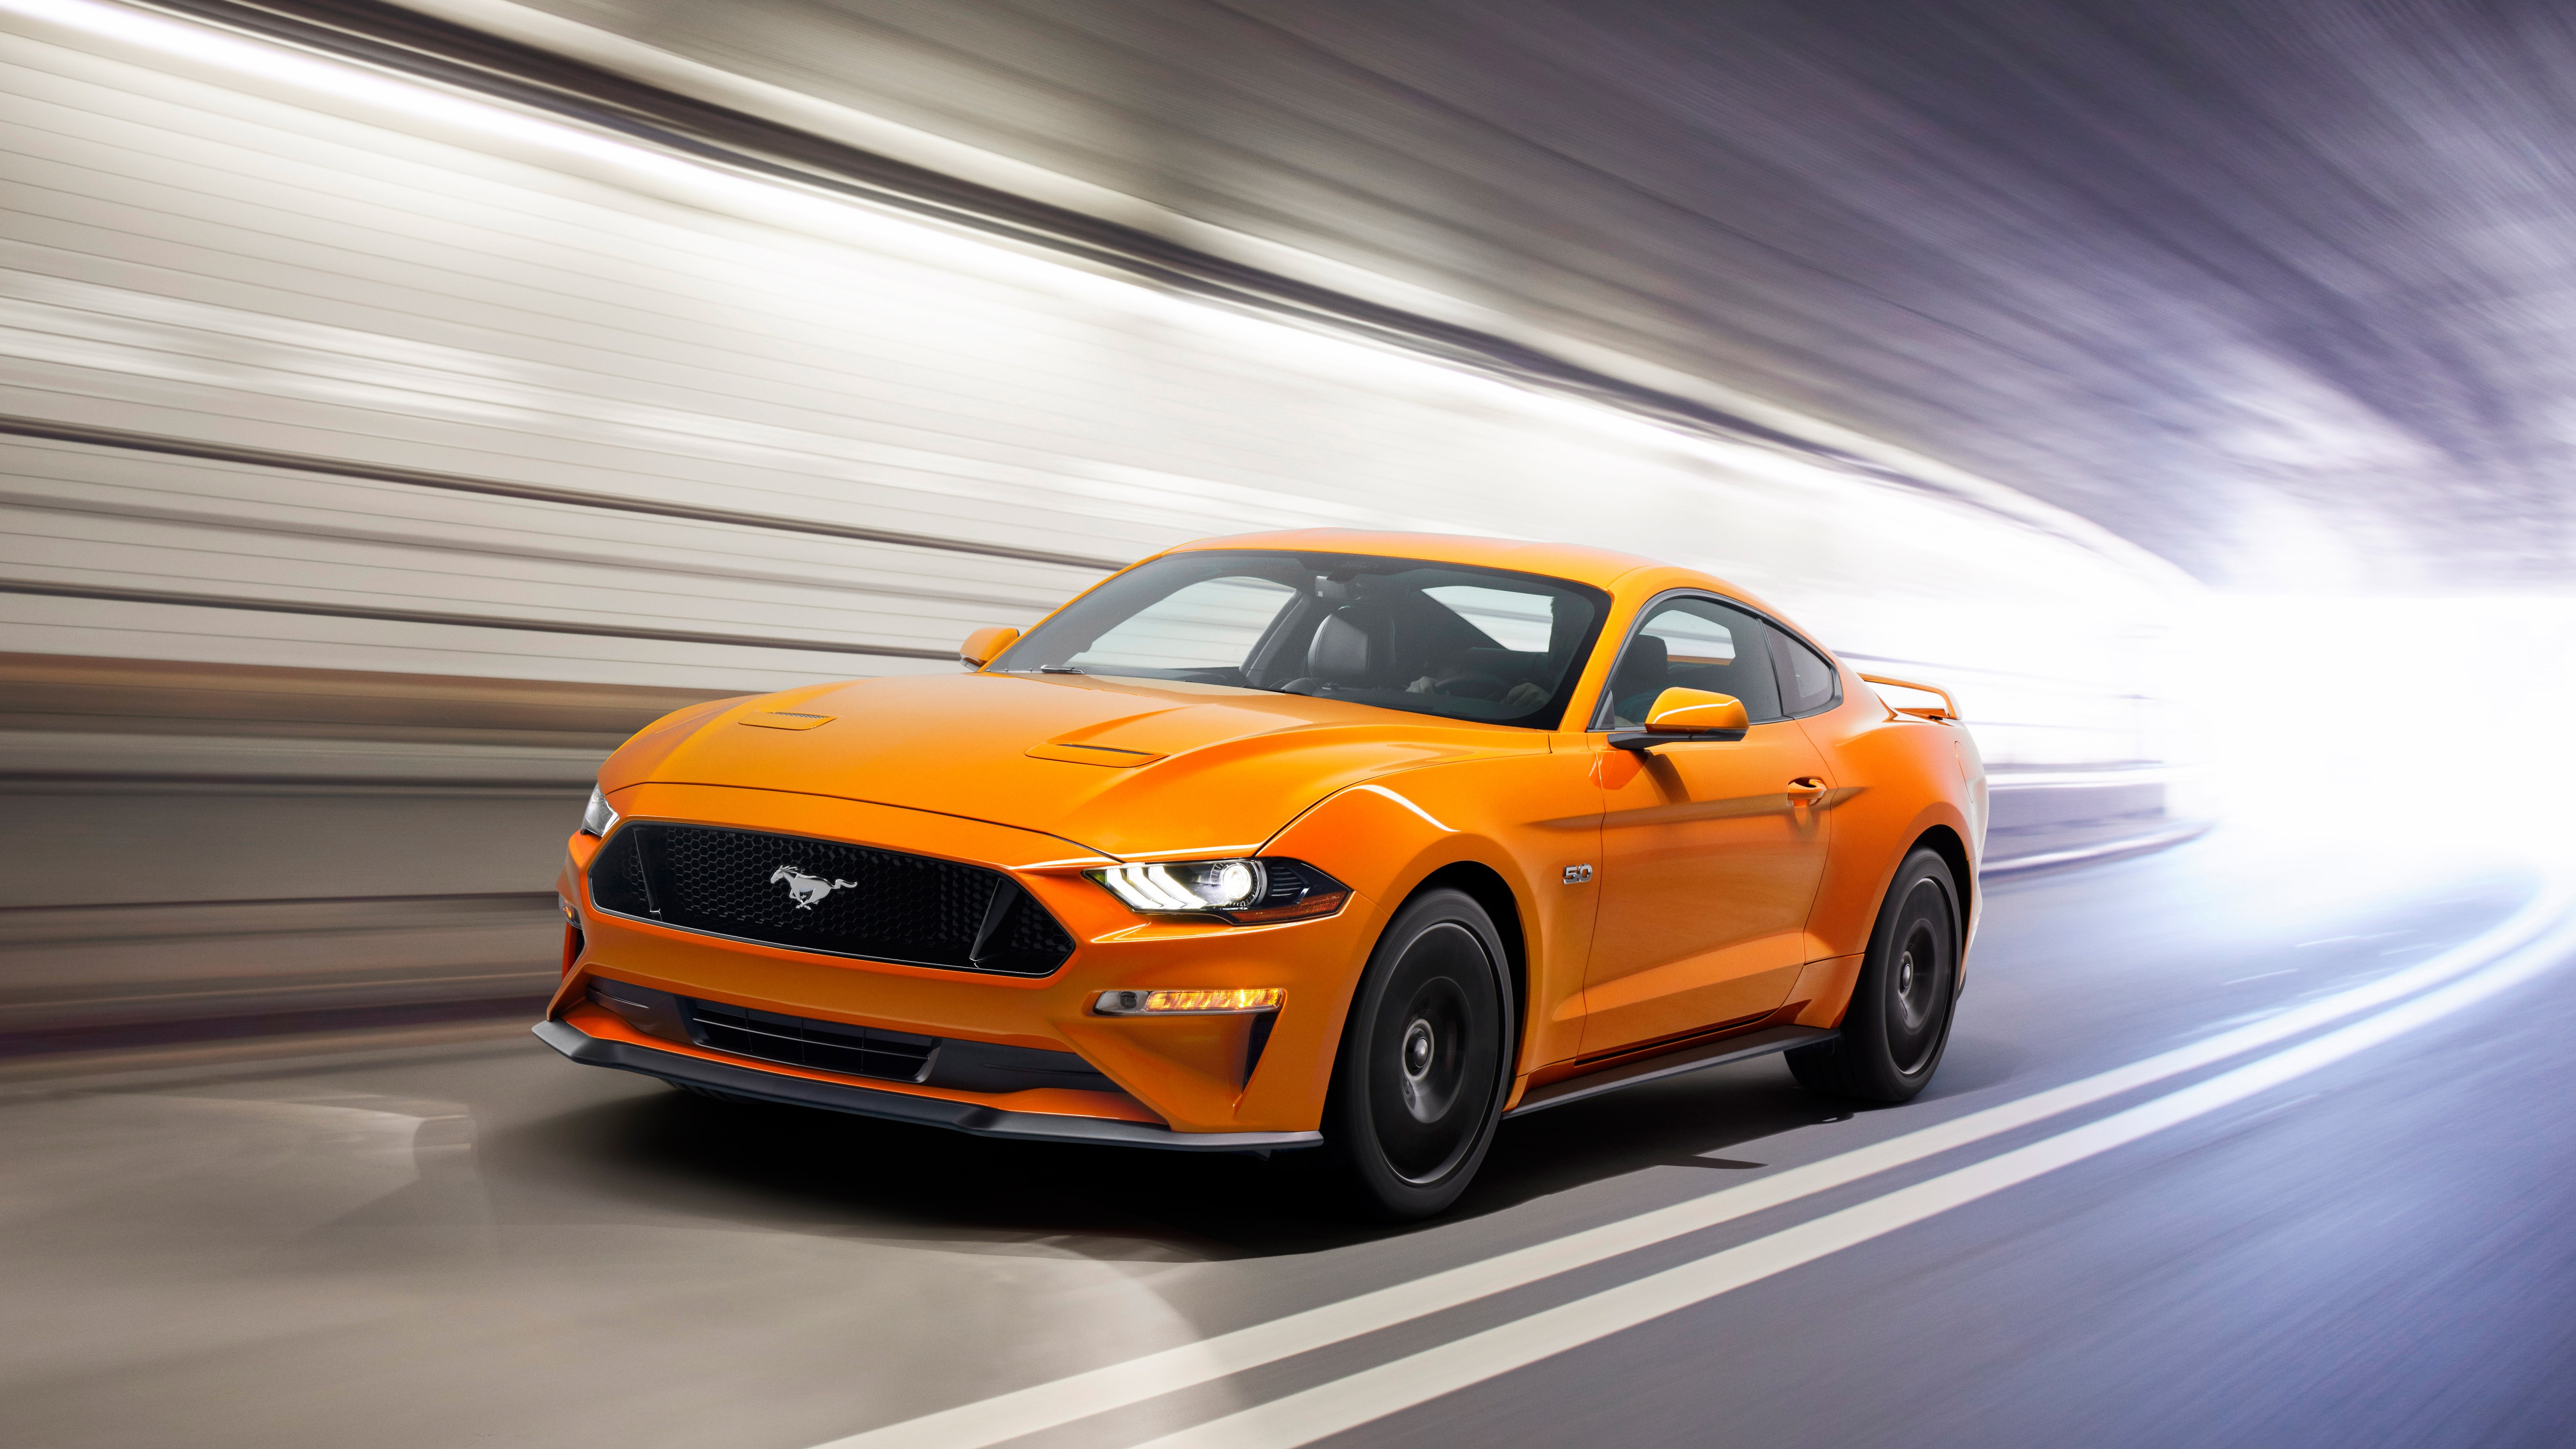 Car Ford Mustang Orange Cars Vehicle Tunnel 5120x2880